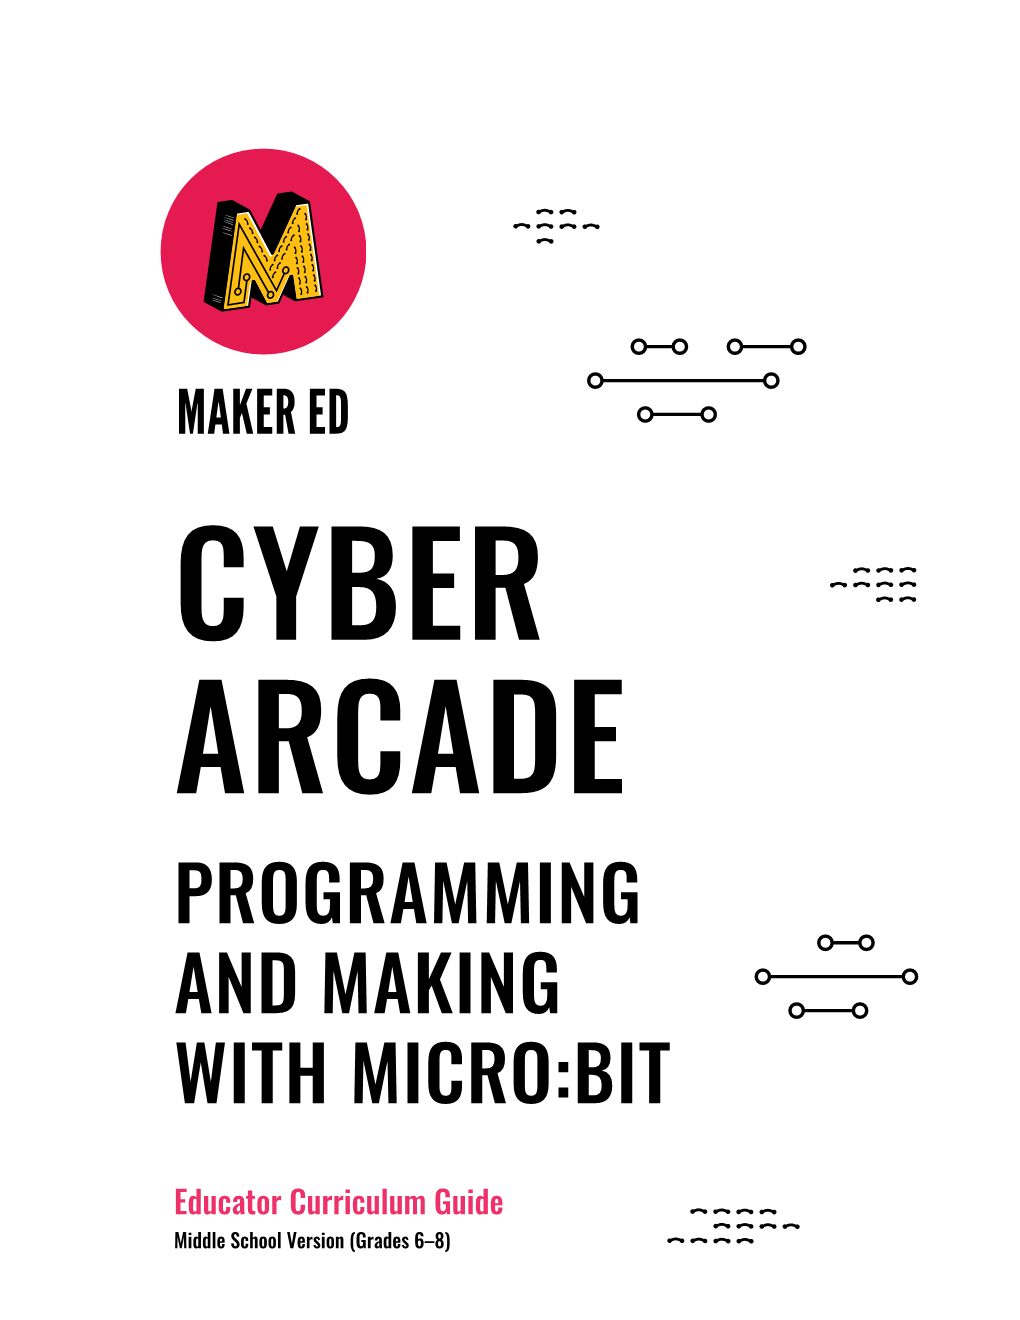 Programming and Making with Micro:Bit